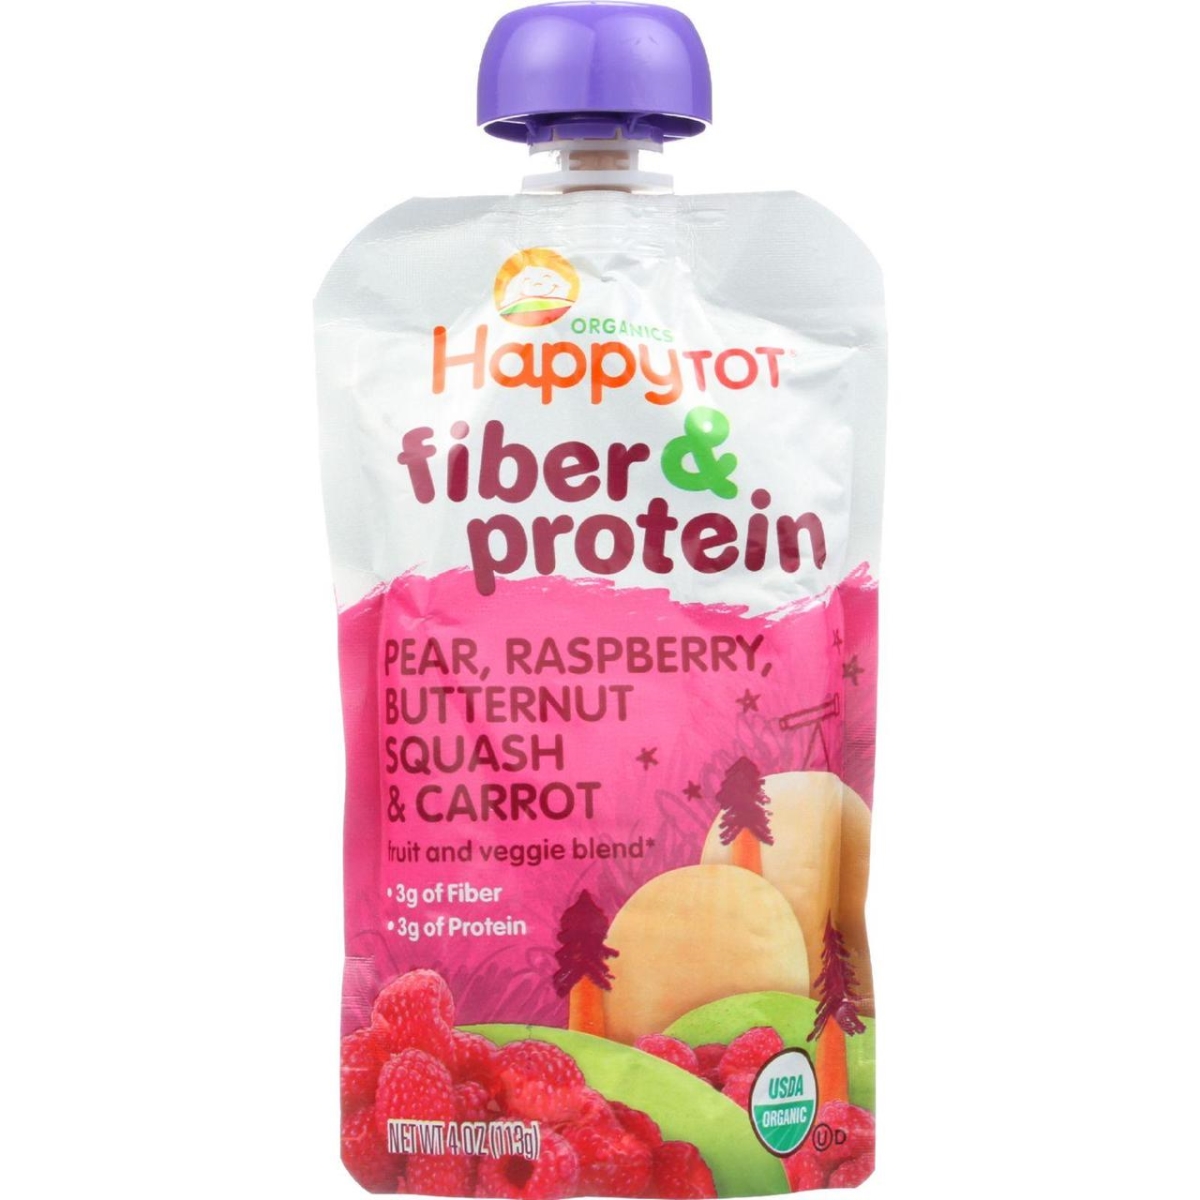 Hg1620095 4 Oz Organic Fiber & Protein - Stage 4 Pear Raspberry Butternut Squash & Carrot Toddler Food, Case Of 16